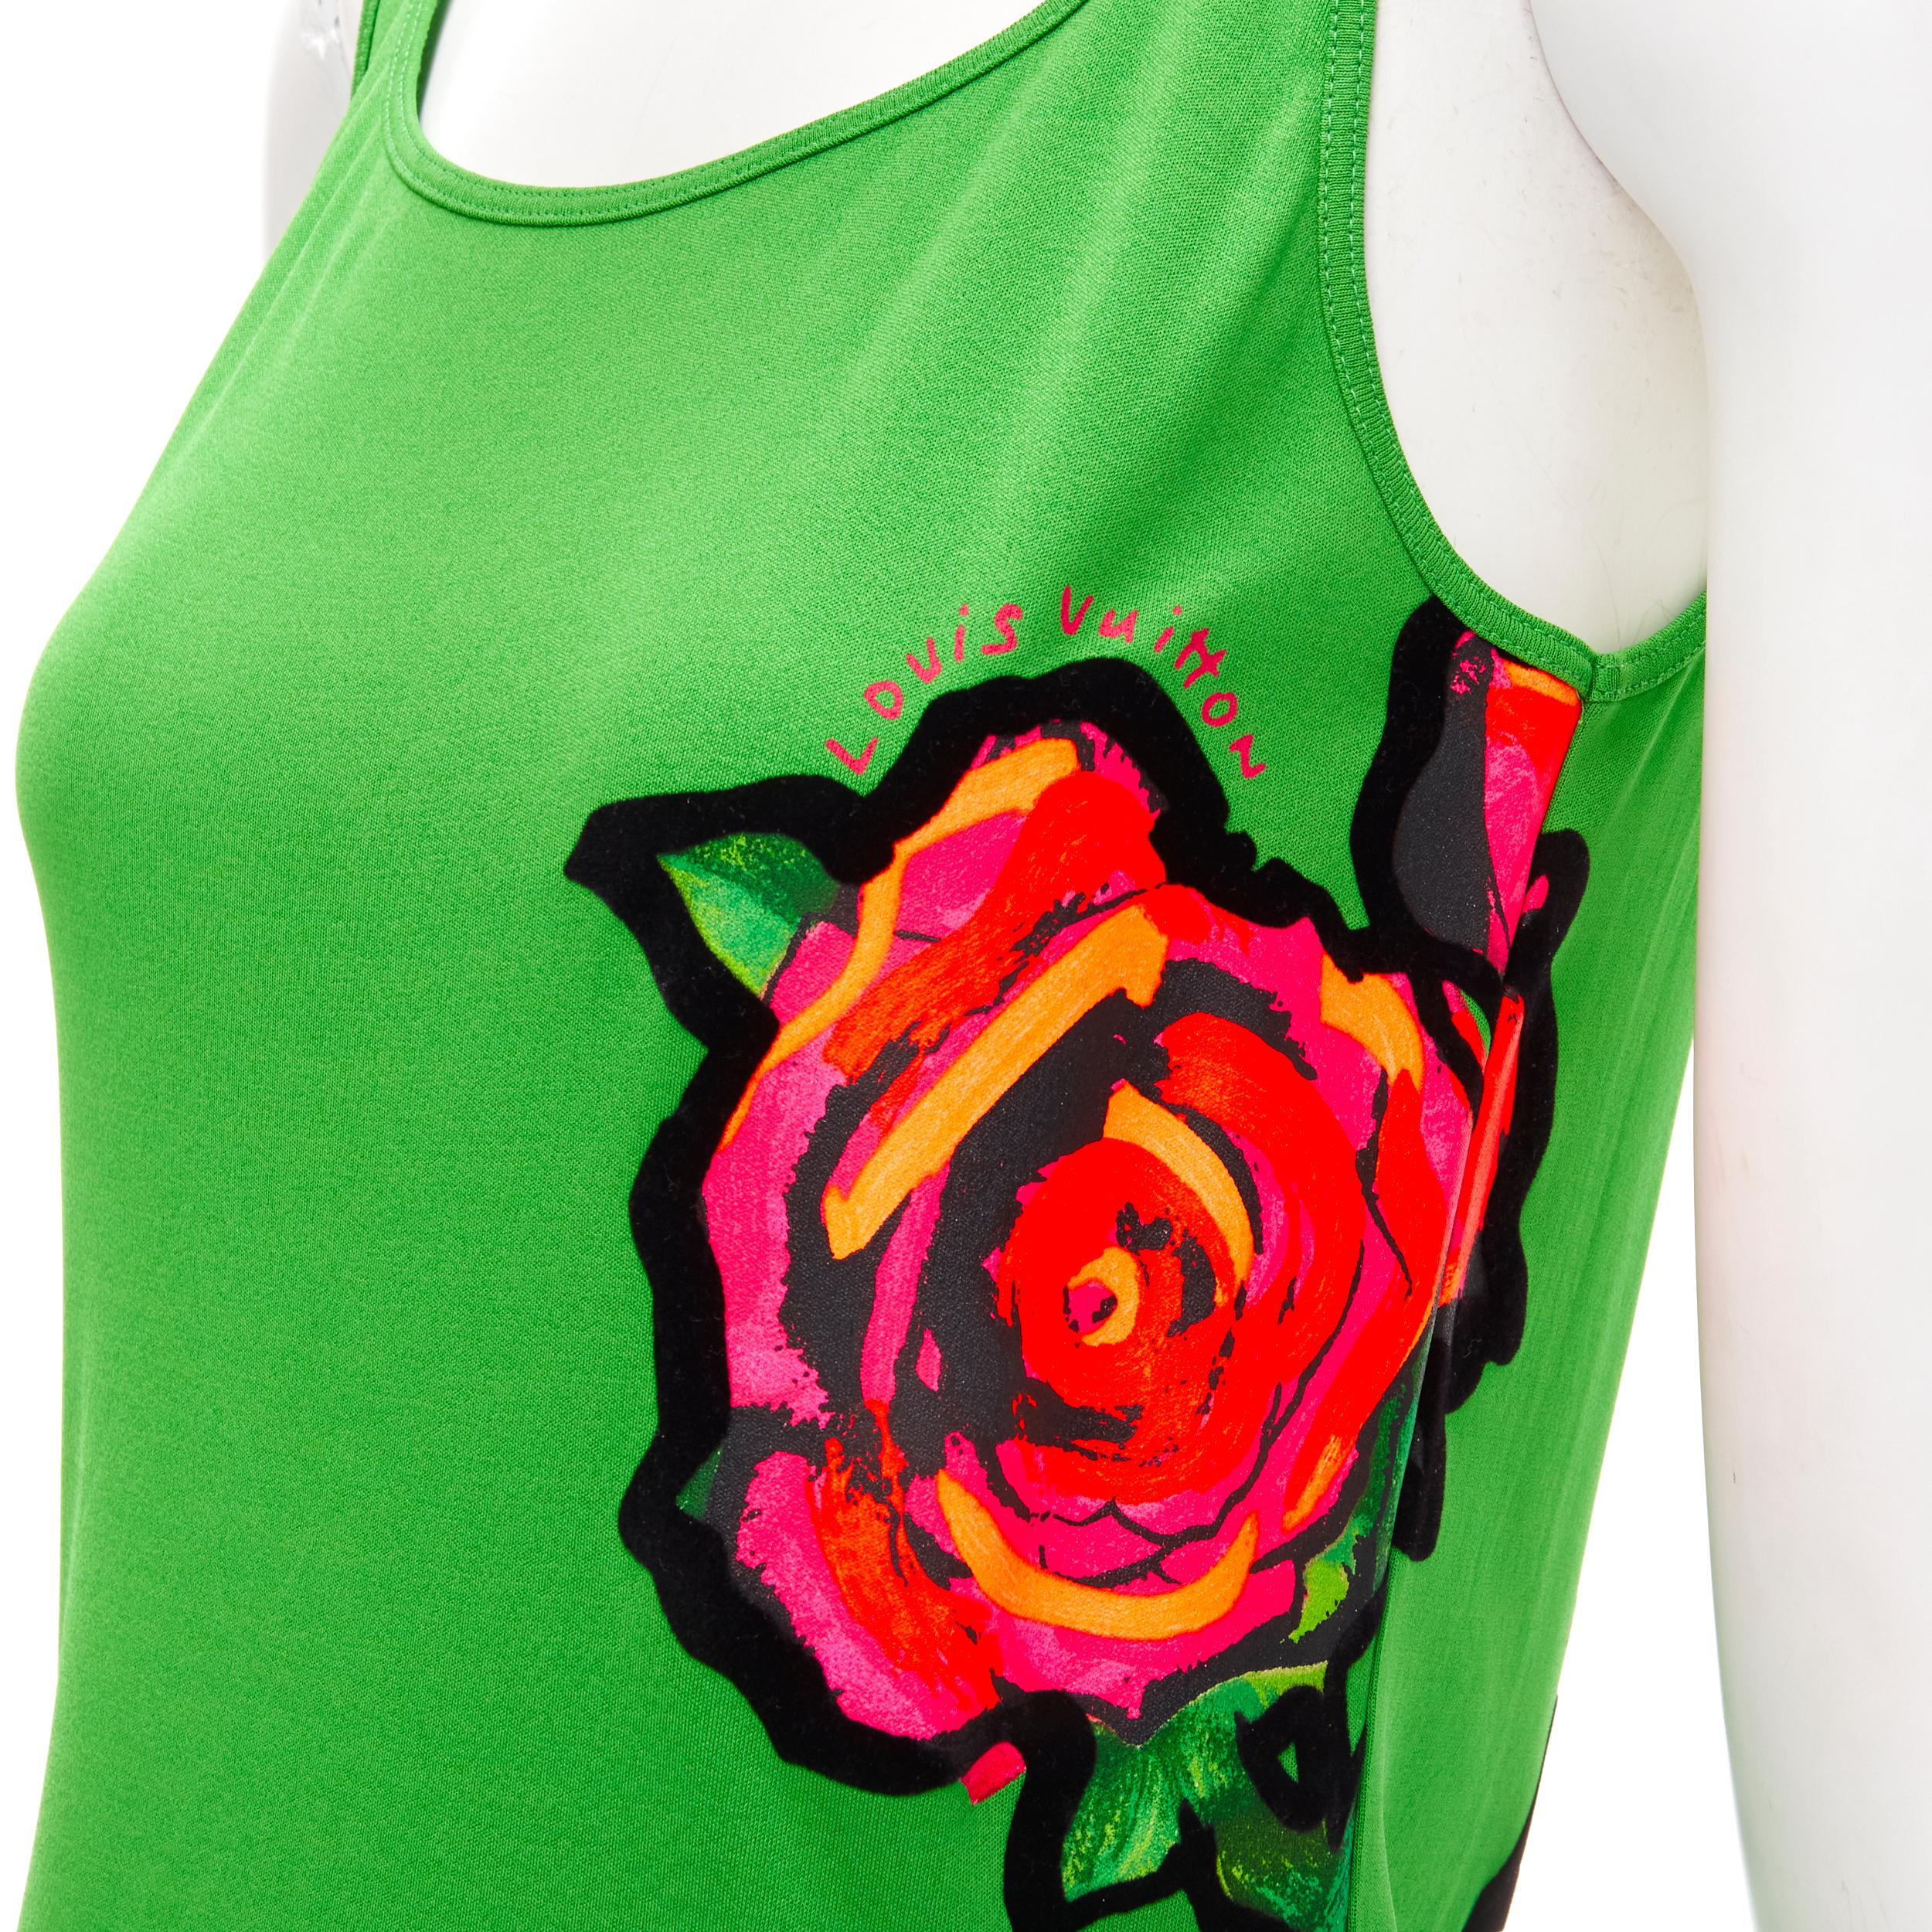 LOUIS VUITTON Stephen Sprouse Neon pink Graffiti Pop Rose green mini dress S 
Reference: ANWU/A00666 
Brand: Louis Vuitton
Designer: Marc Jacobs 
Collection: Stephen Sprouse Pop Rose 
Material: Feels like viscose 
Color: Green 
Pattern: Floral